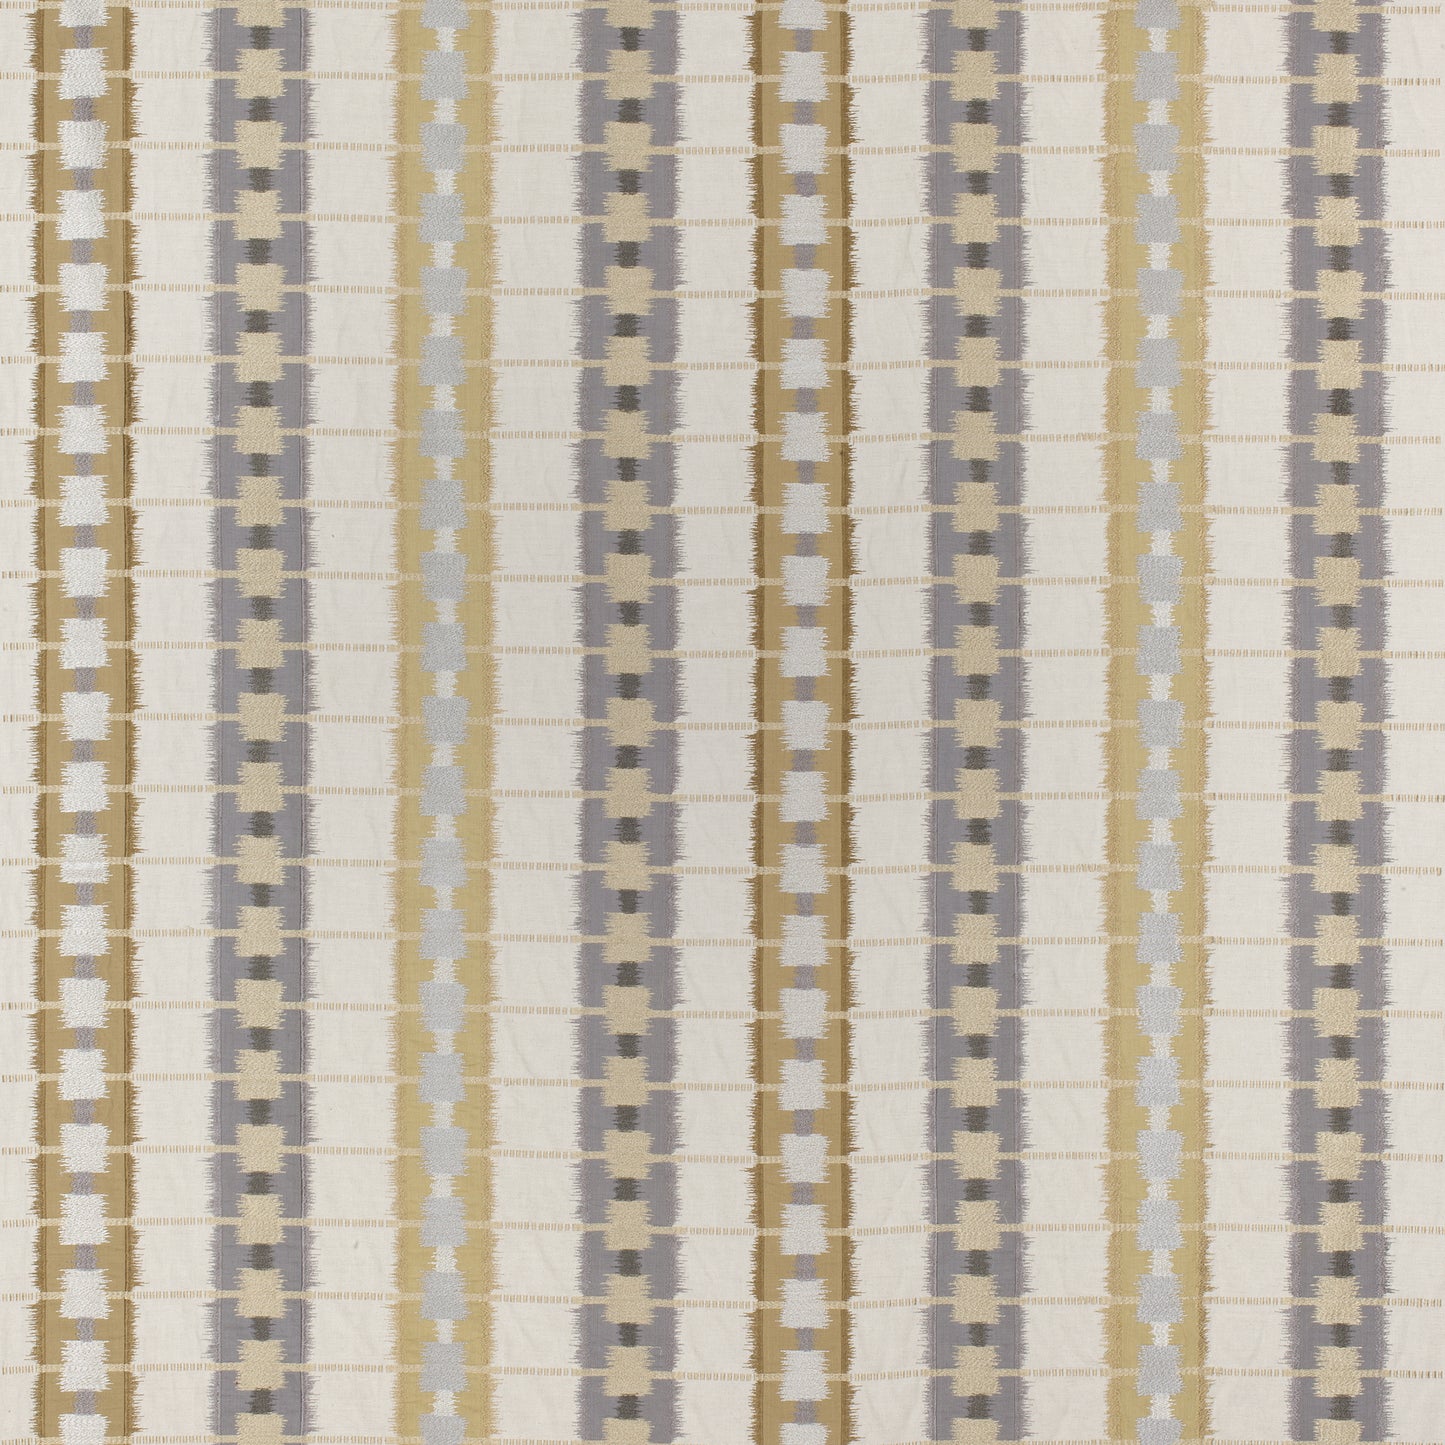 Purchase Thibaut Fabric Item# W788712 pattern name Sri Lanka Embroidery color Grey